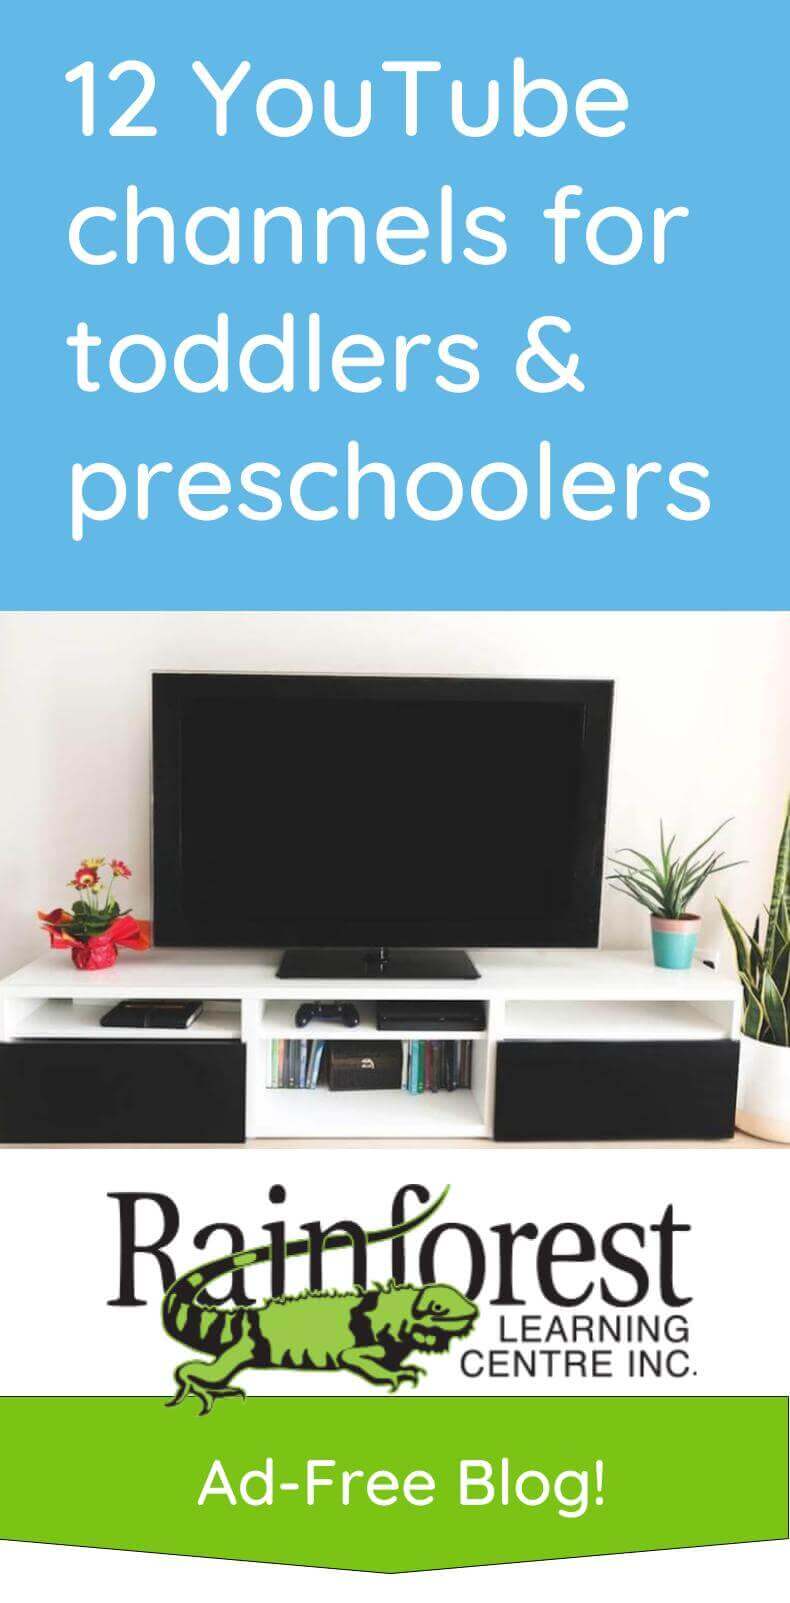 12 YouTube channels for toddlers and preschoolers article - pinterest image